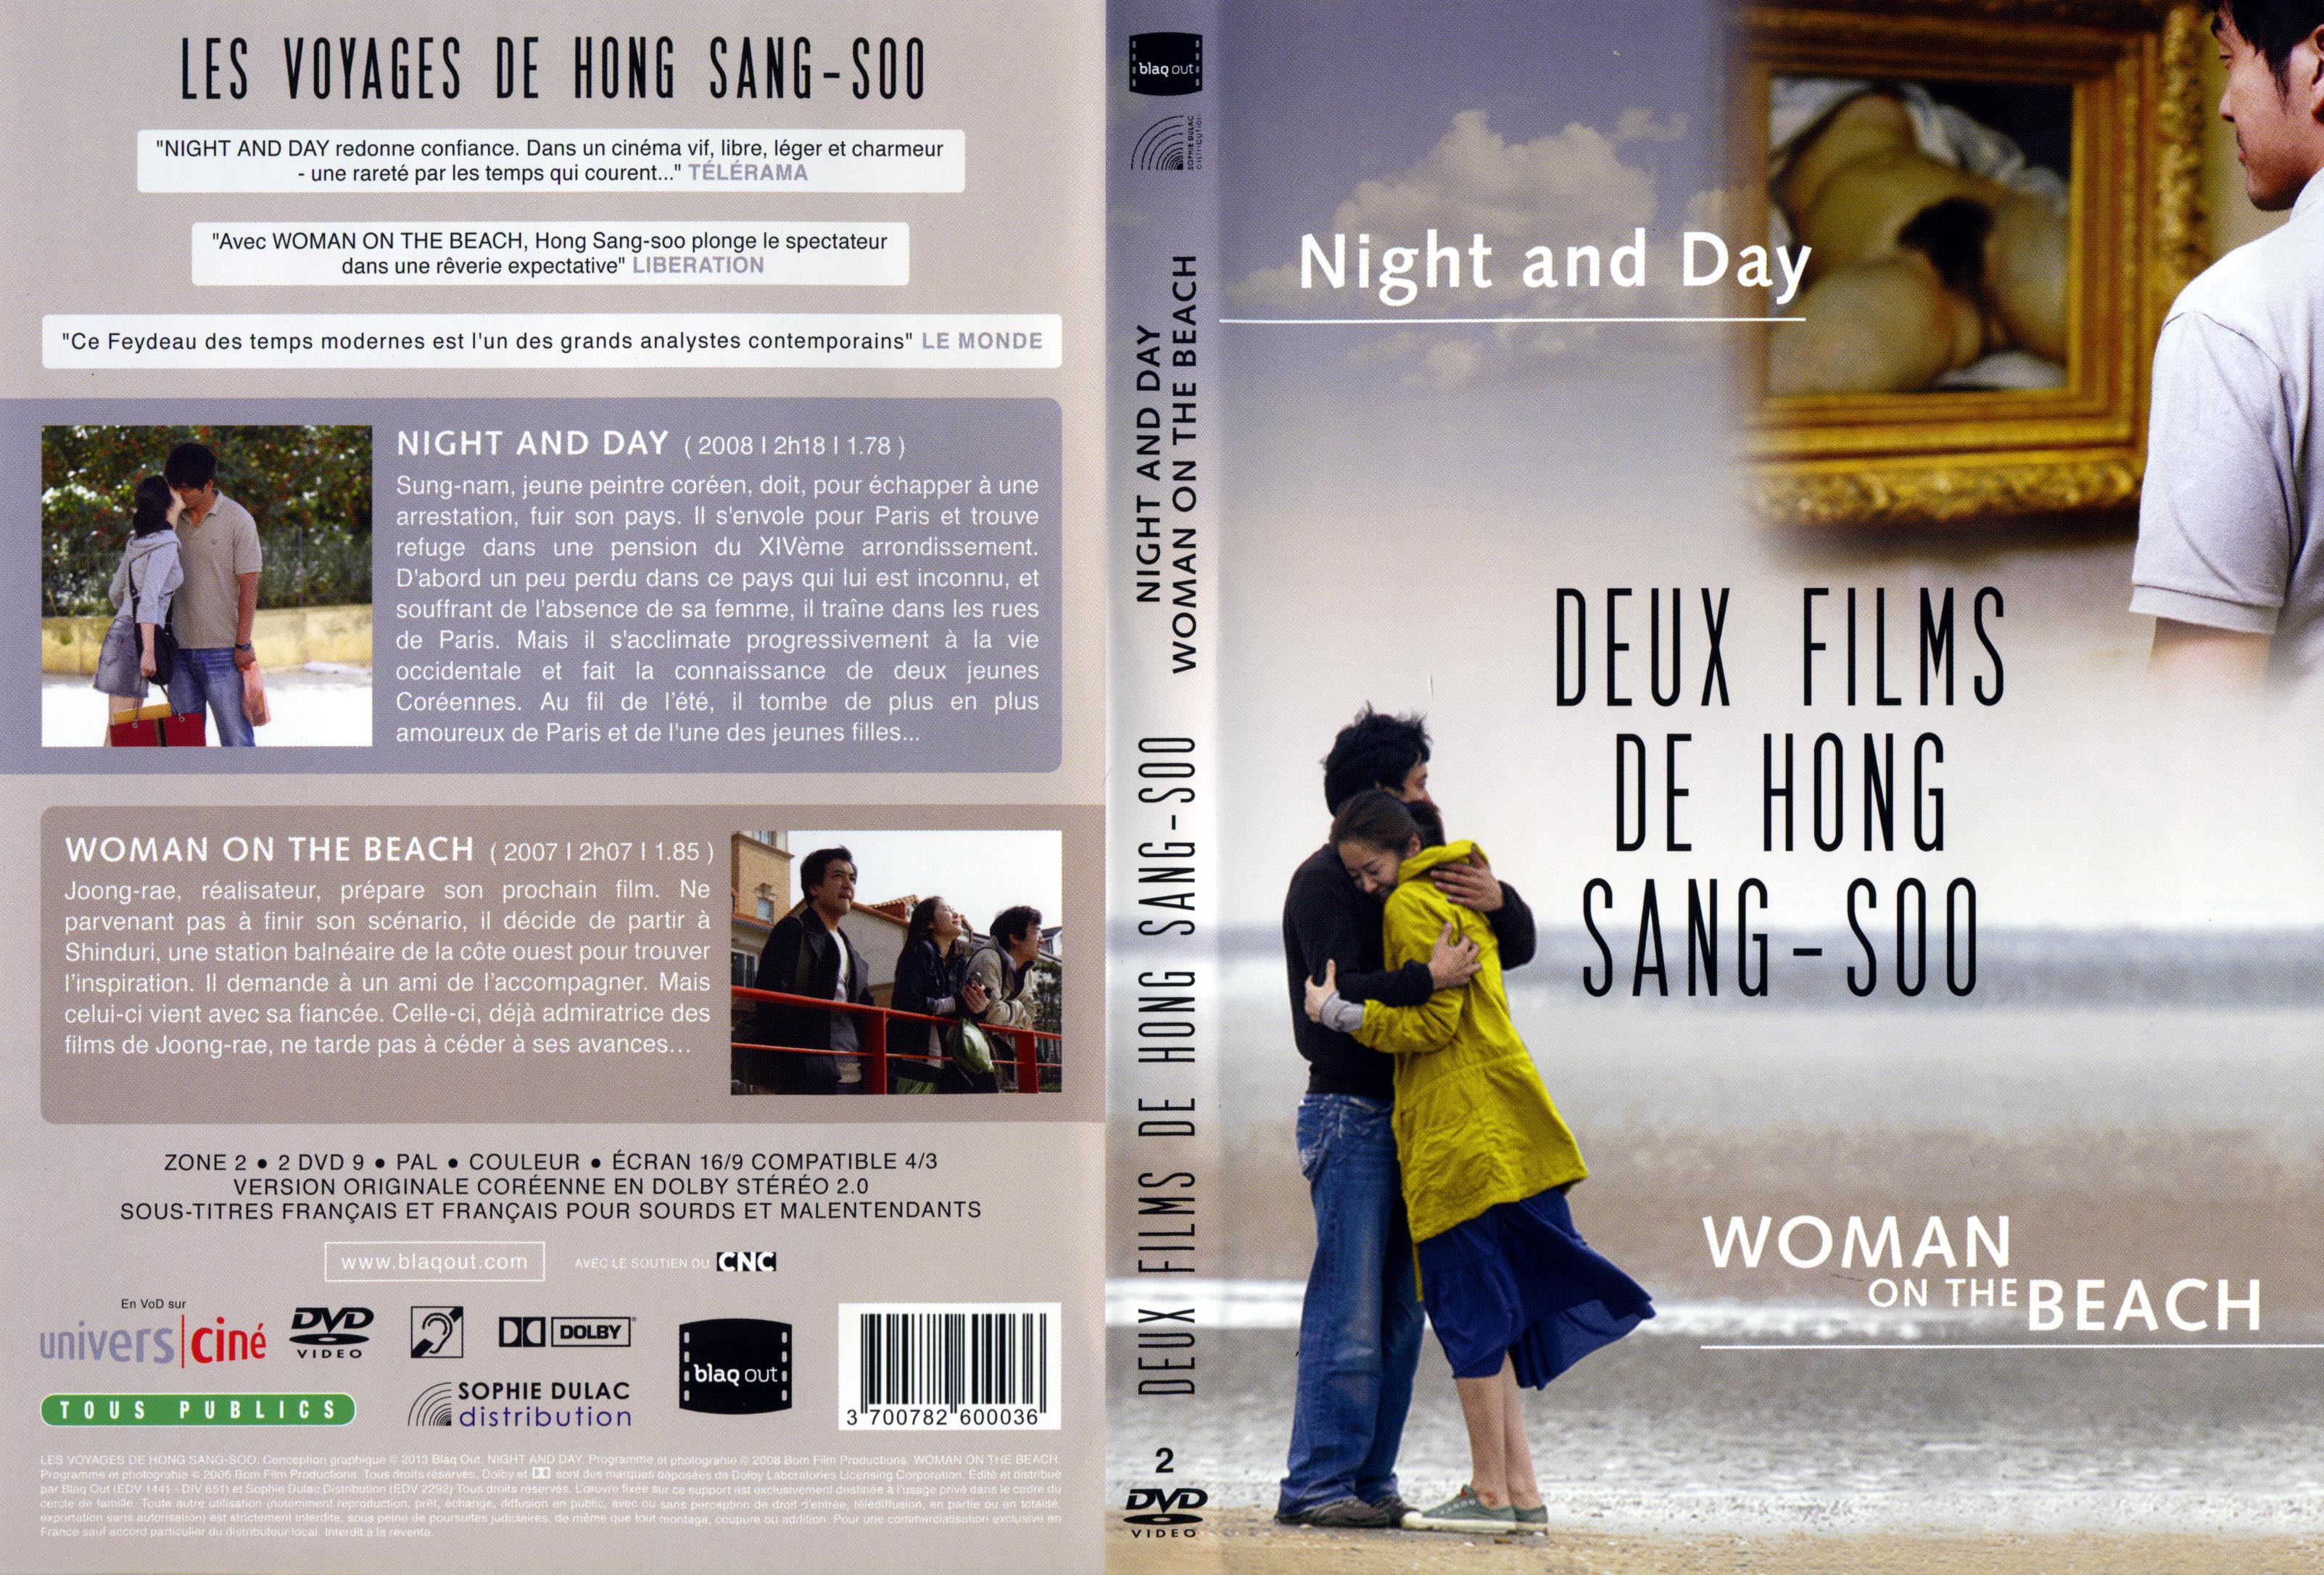 Jaquette DVD Night and day ET Woman on the beach